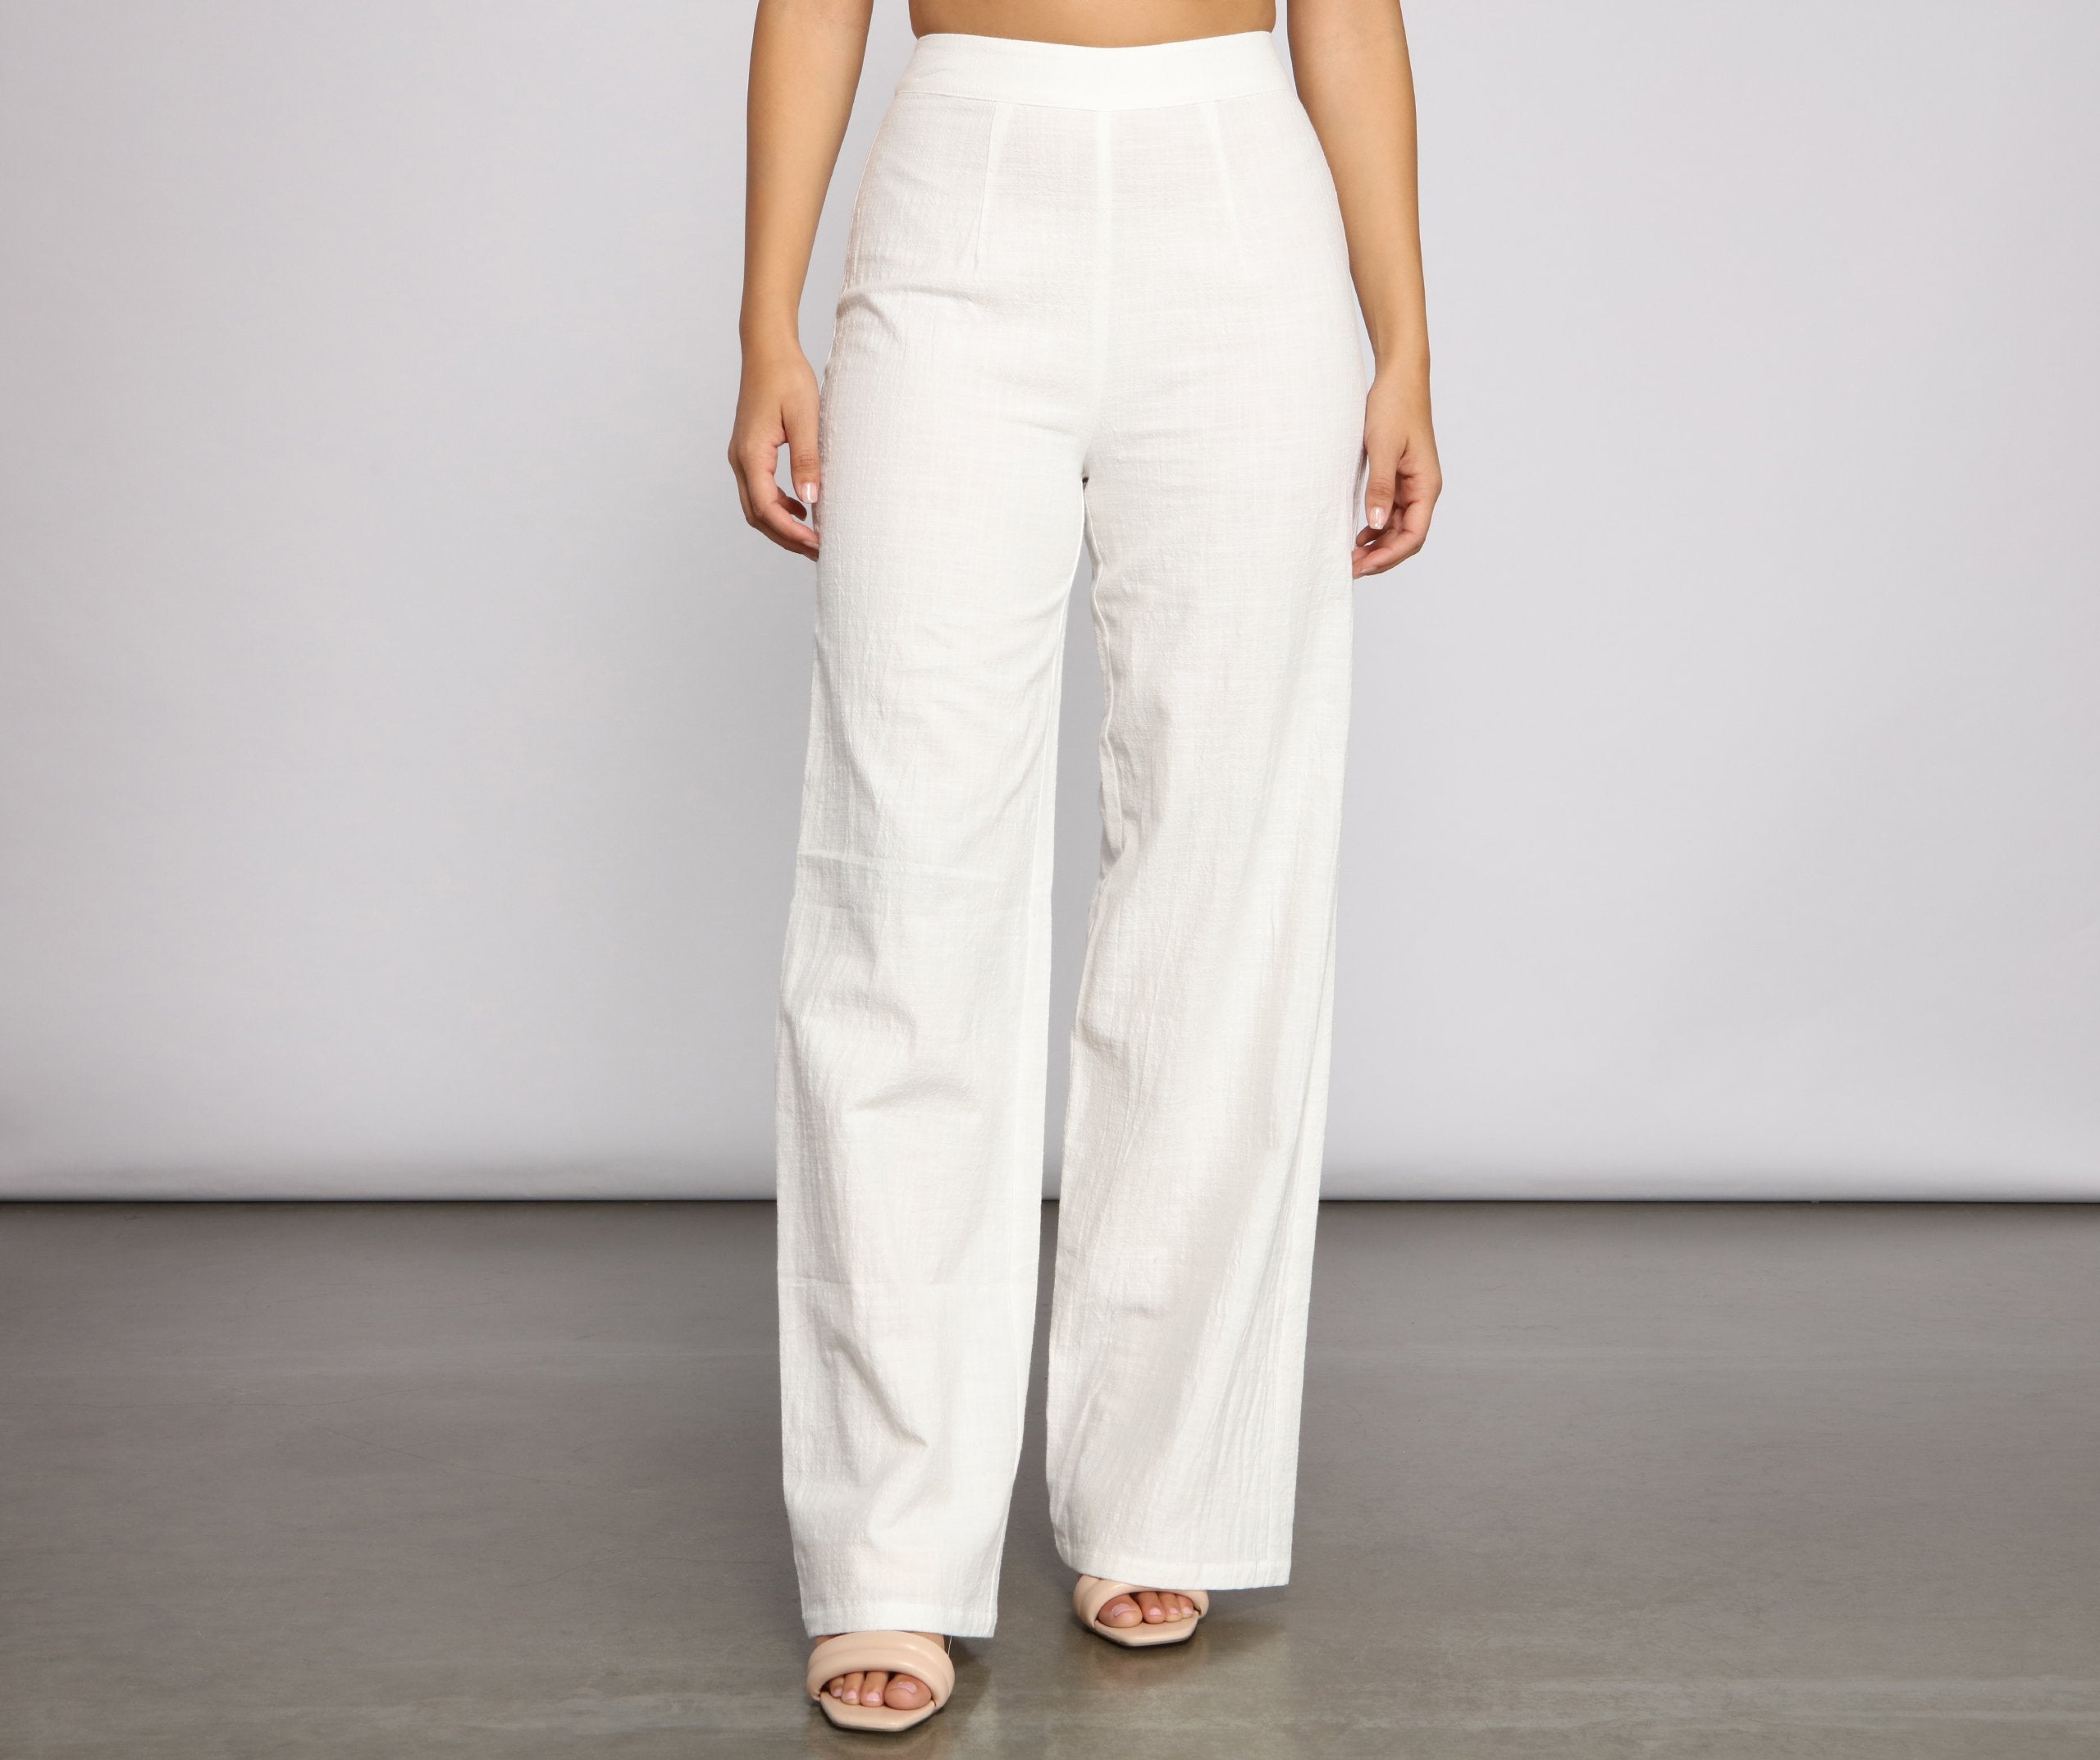 Whisked Away High Waist Pants - Lady Occasions